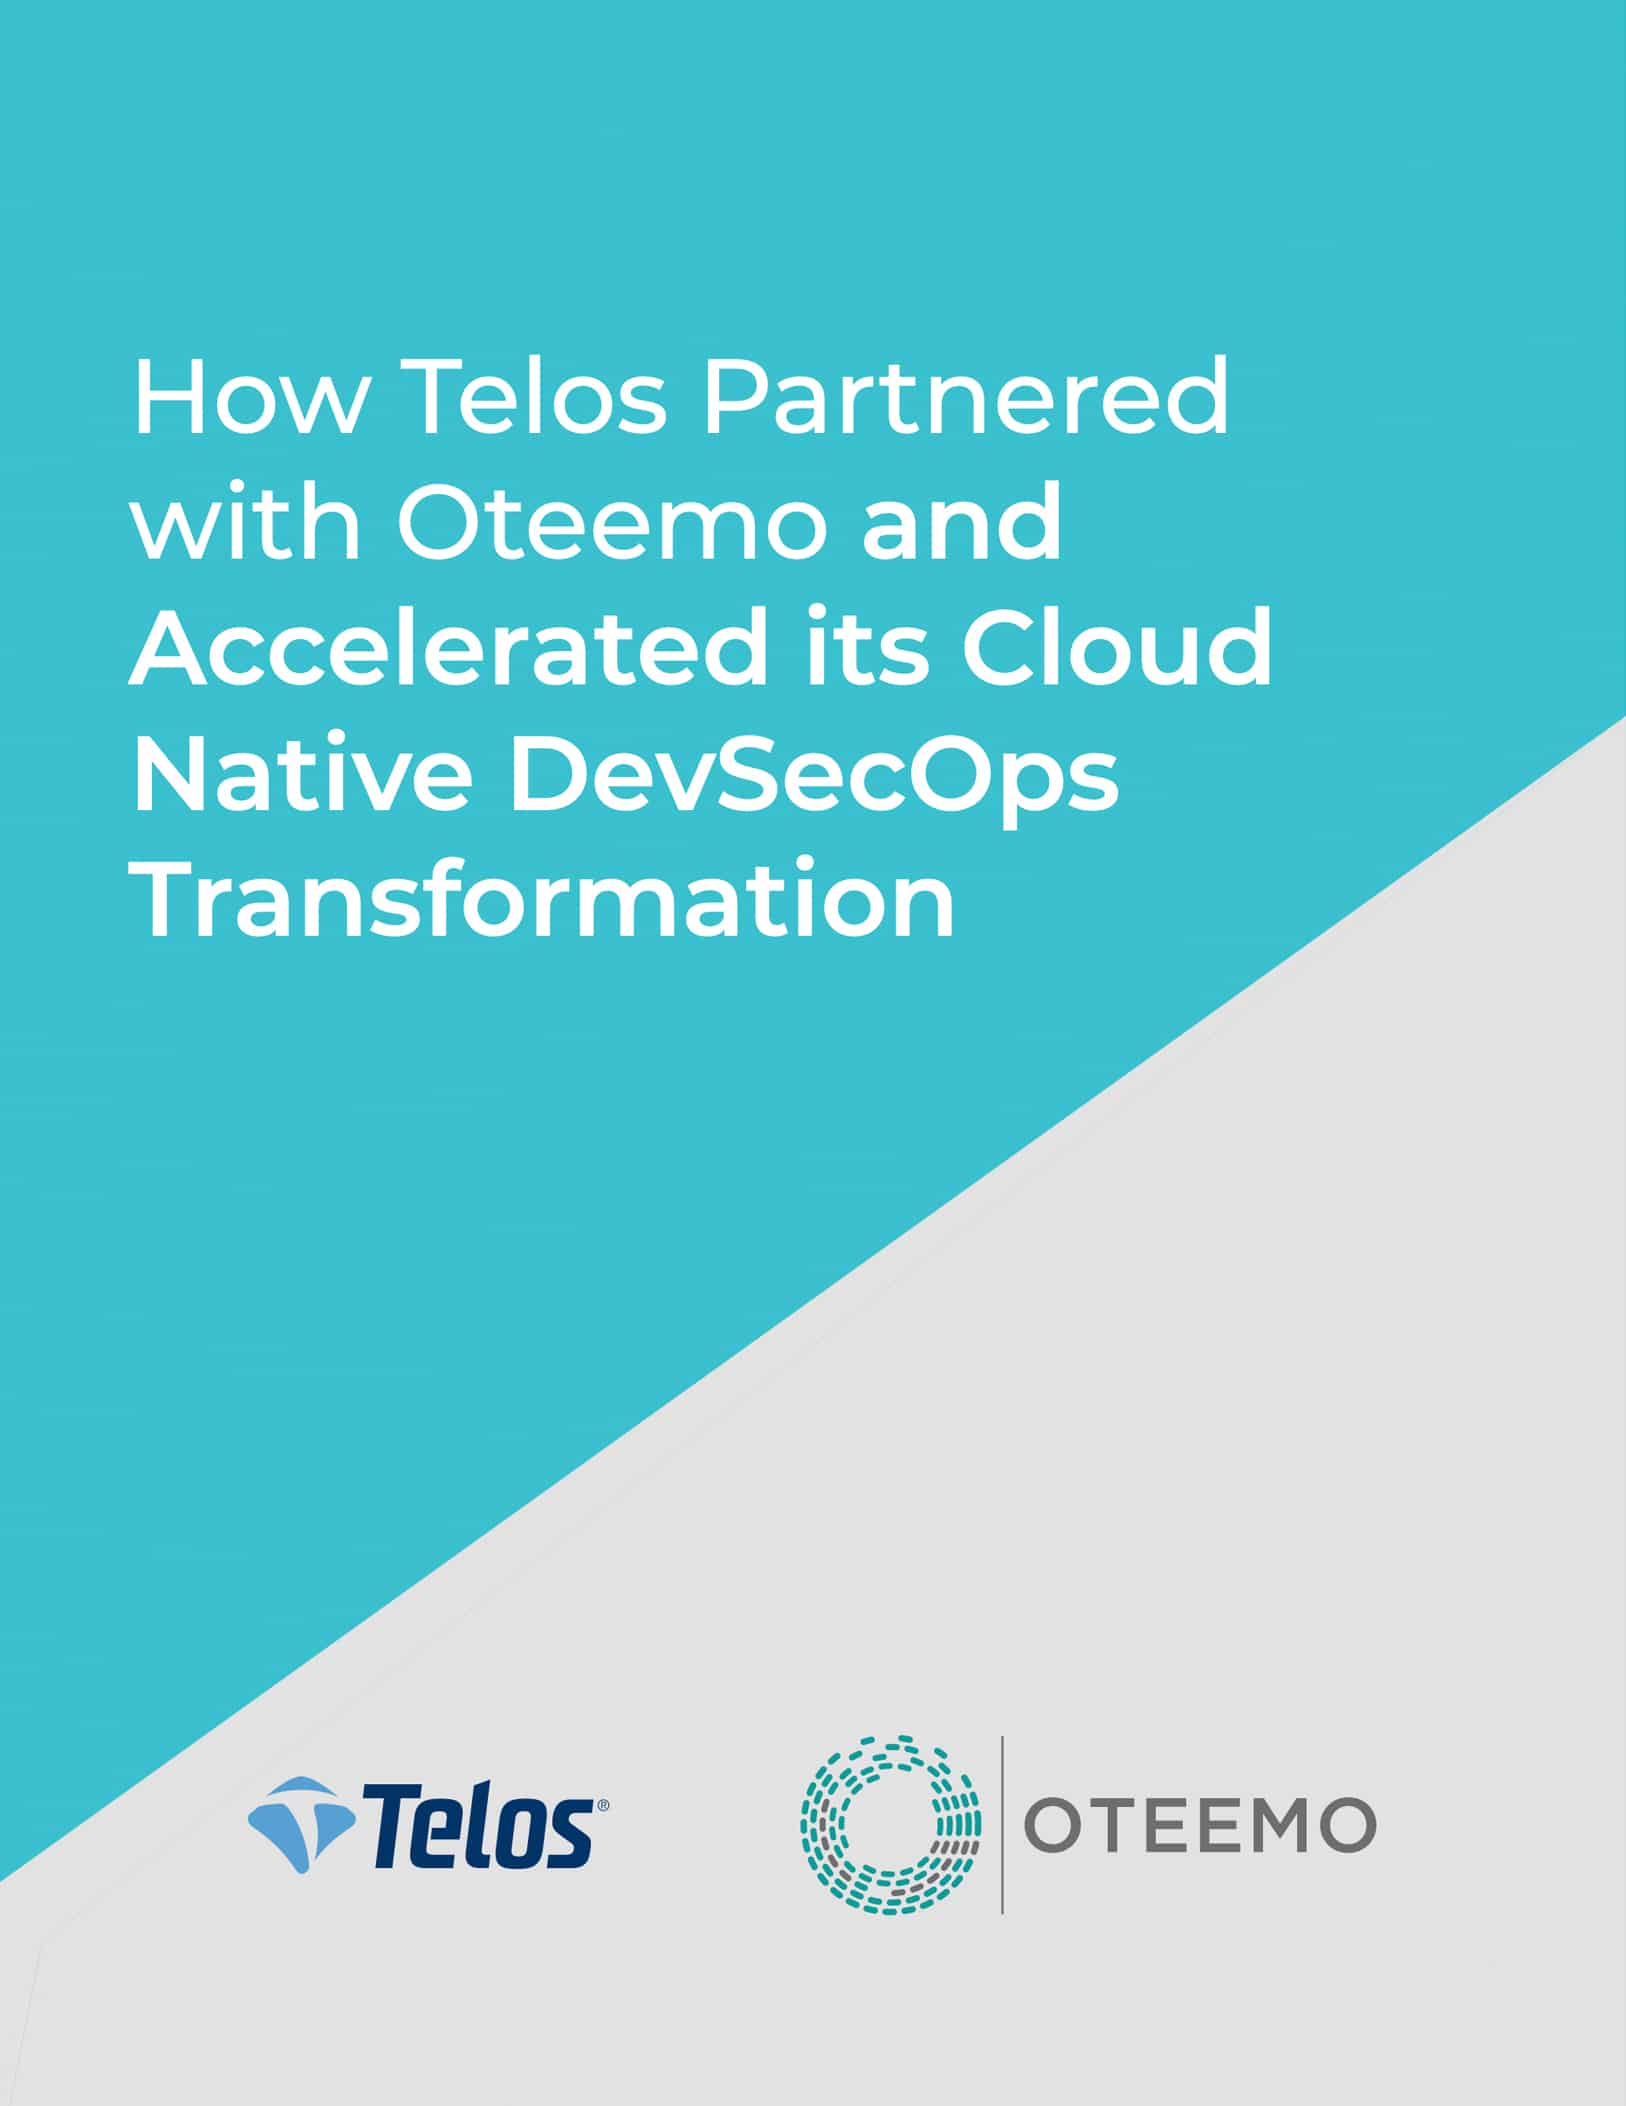 Oteemo's work with Mednax in DevSecOps PDF